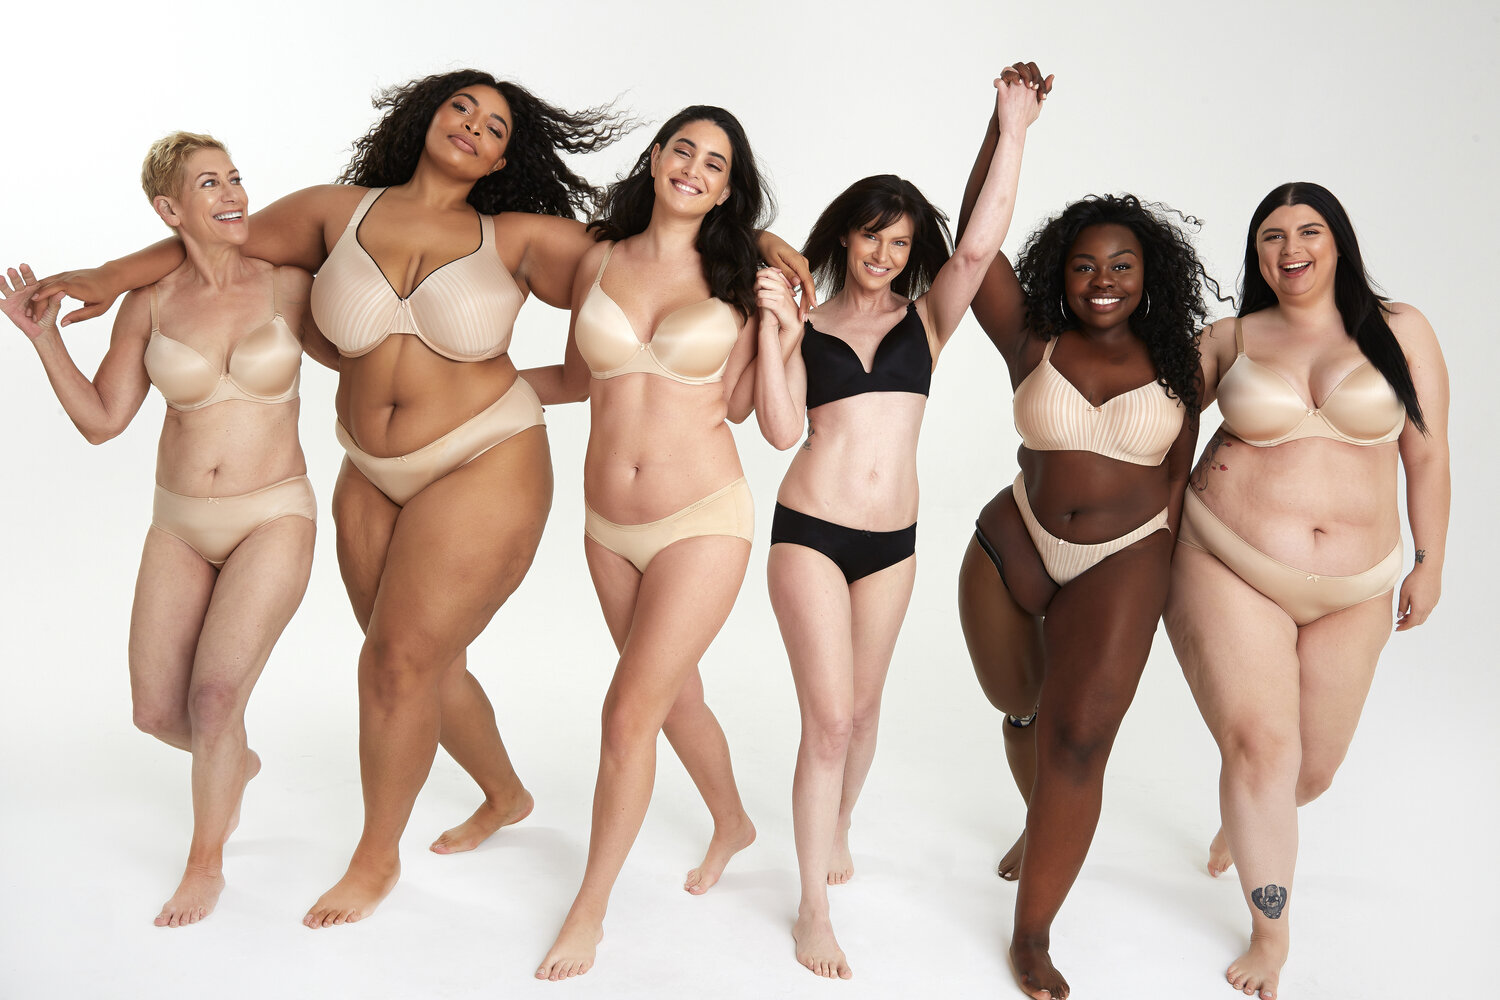 The image on a white background shows 6 very different women hugging and walking smiling towards the camera. Women of different height, age, body type, color, ability. All women are wearing different type of lingerie combos perfectly fitting.